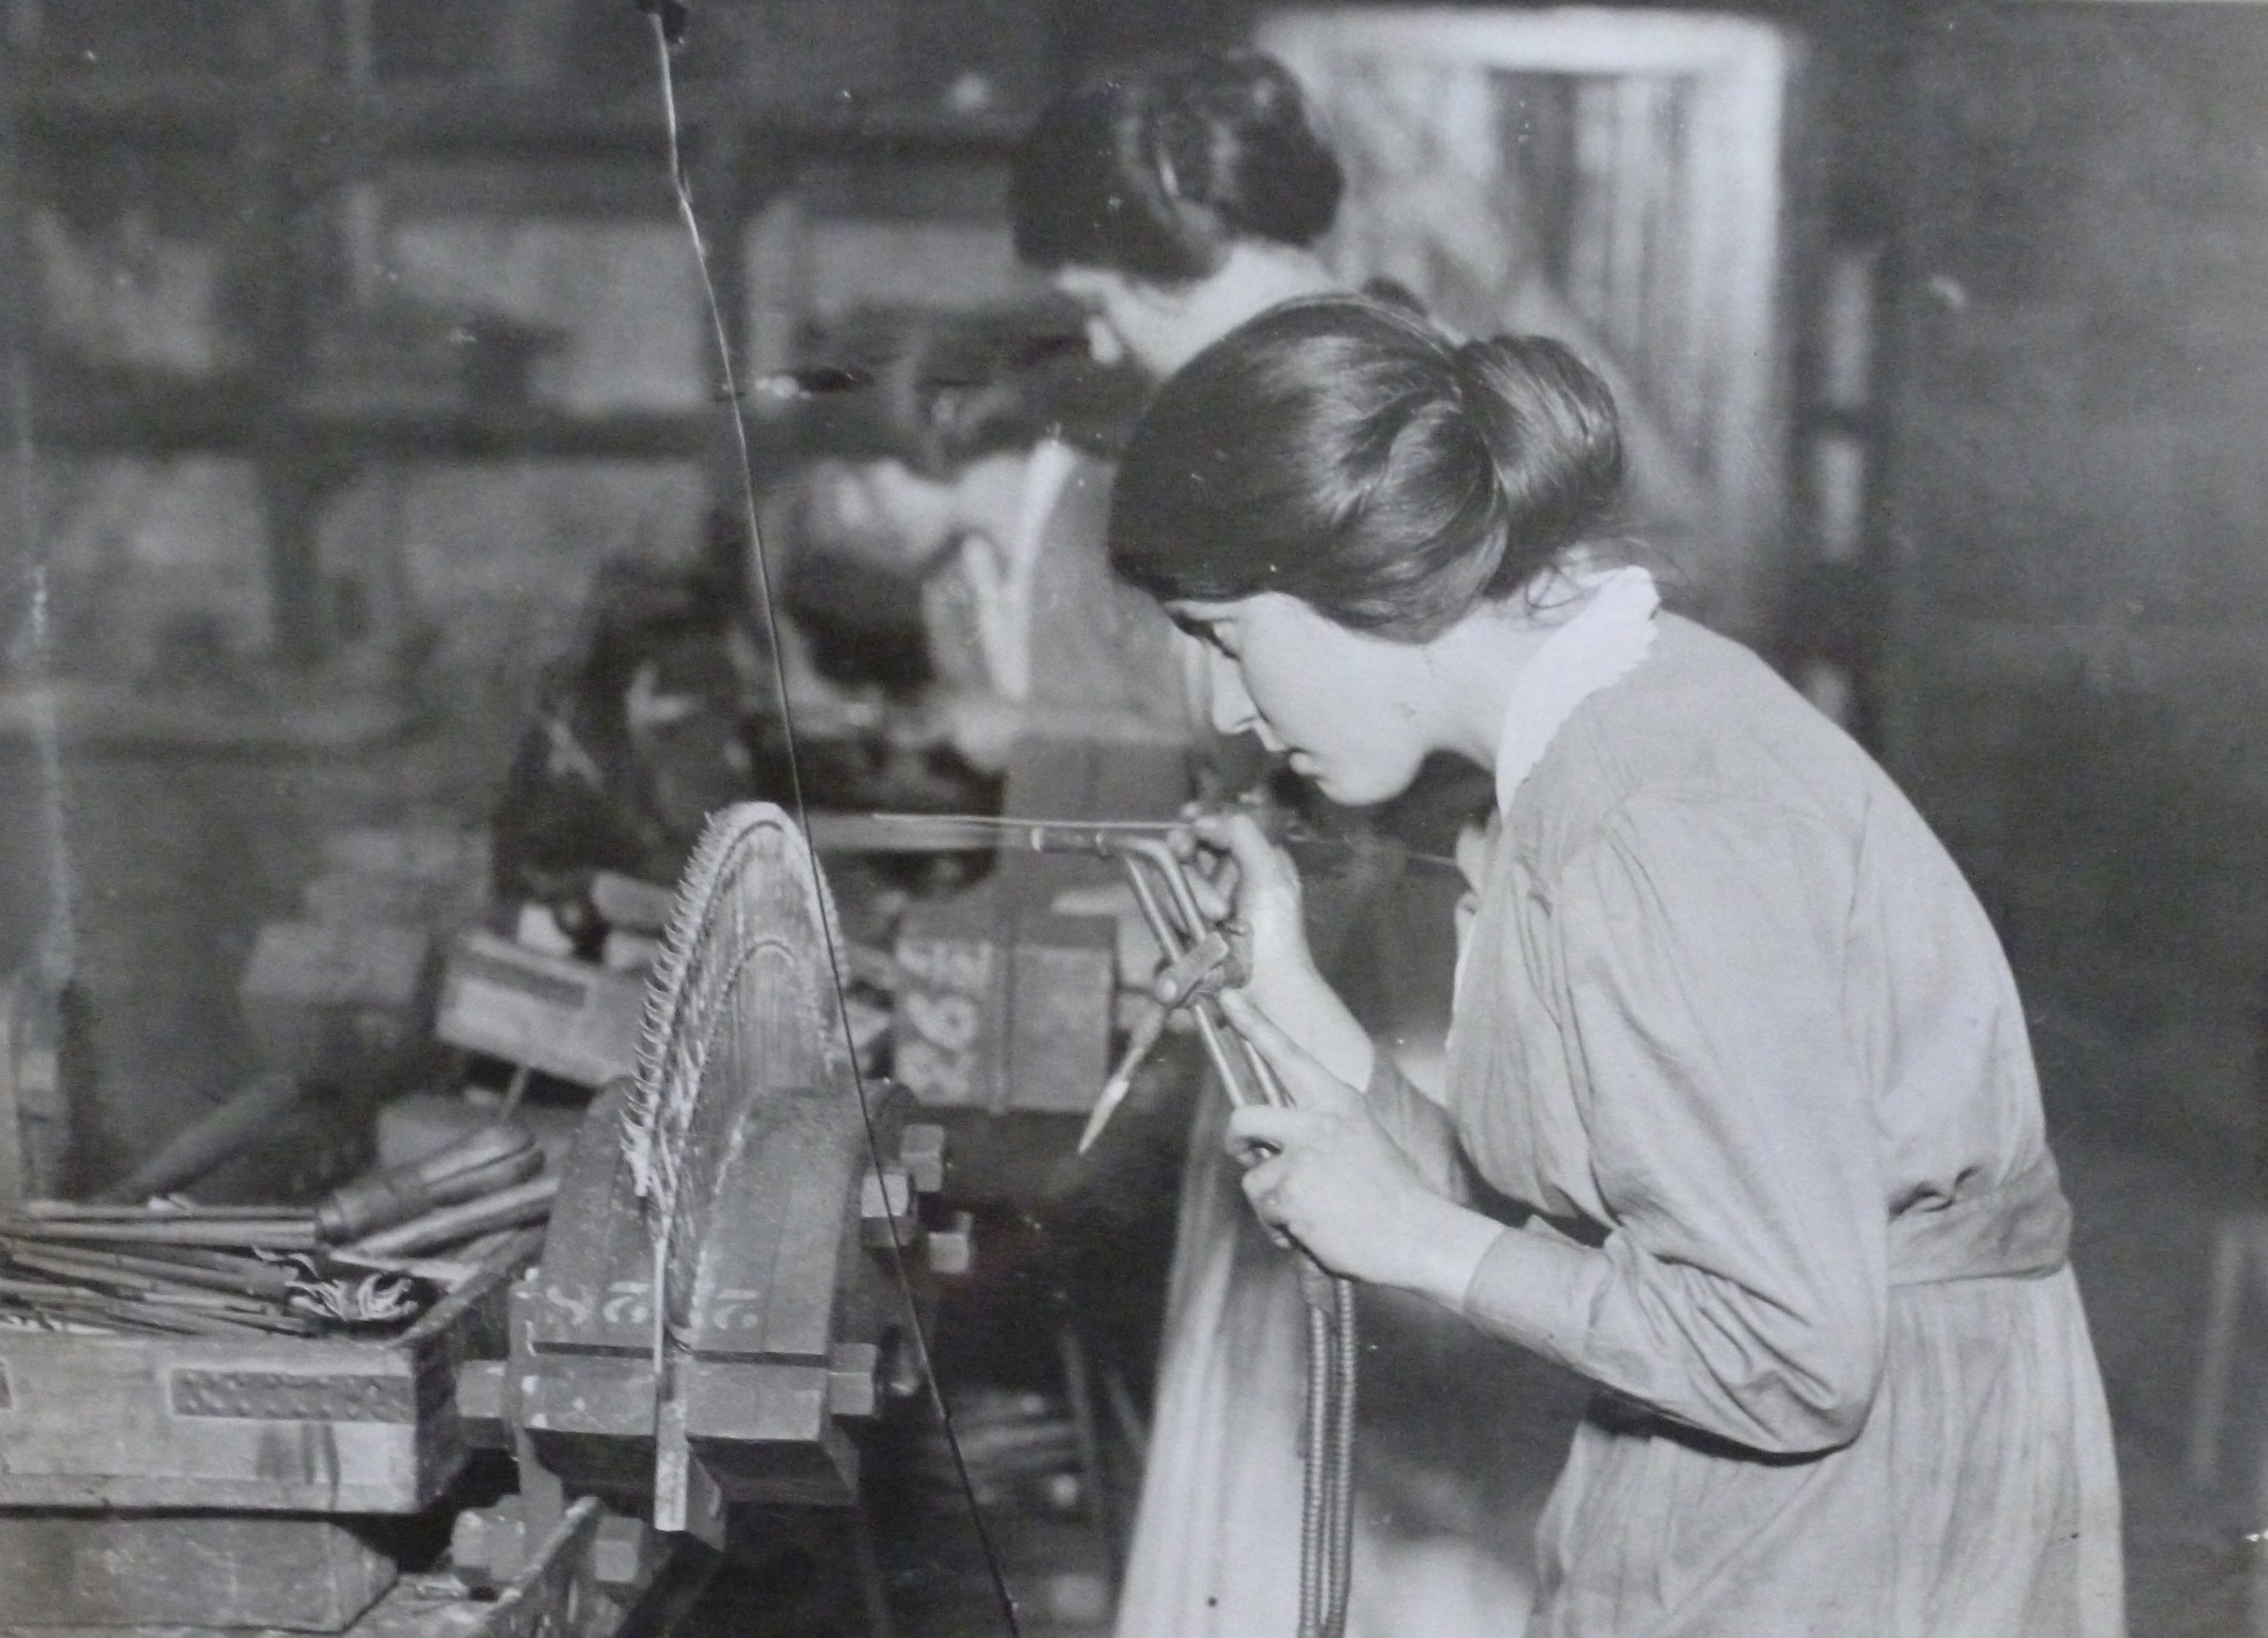 Woman at Parsons' Heaton works engaged in steam turbine manufacture during WW1